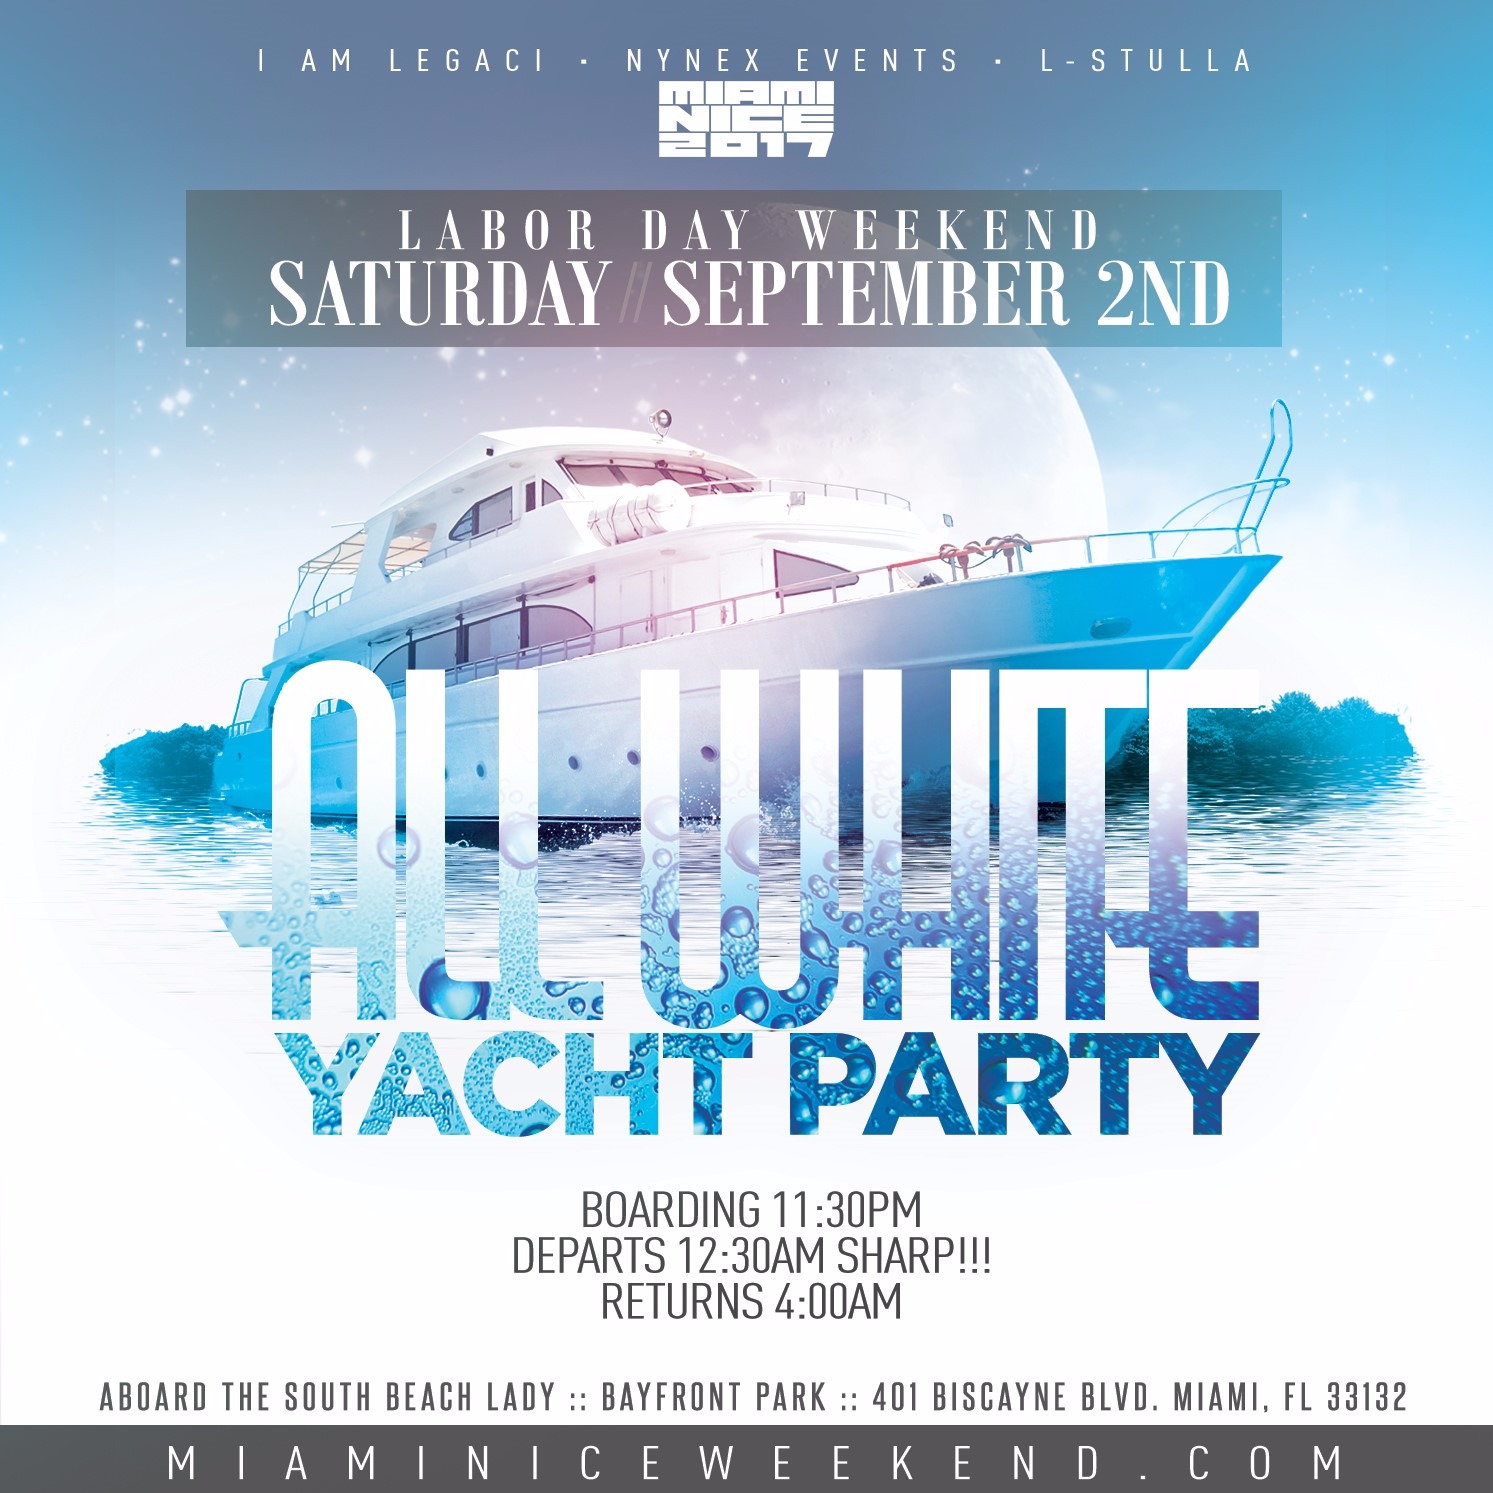 MIAMI NICE 2017 ANNUAL LABOR DAY WEEKEND ALL WHITE YACHT PARTY